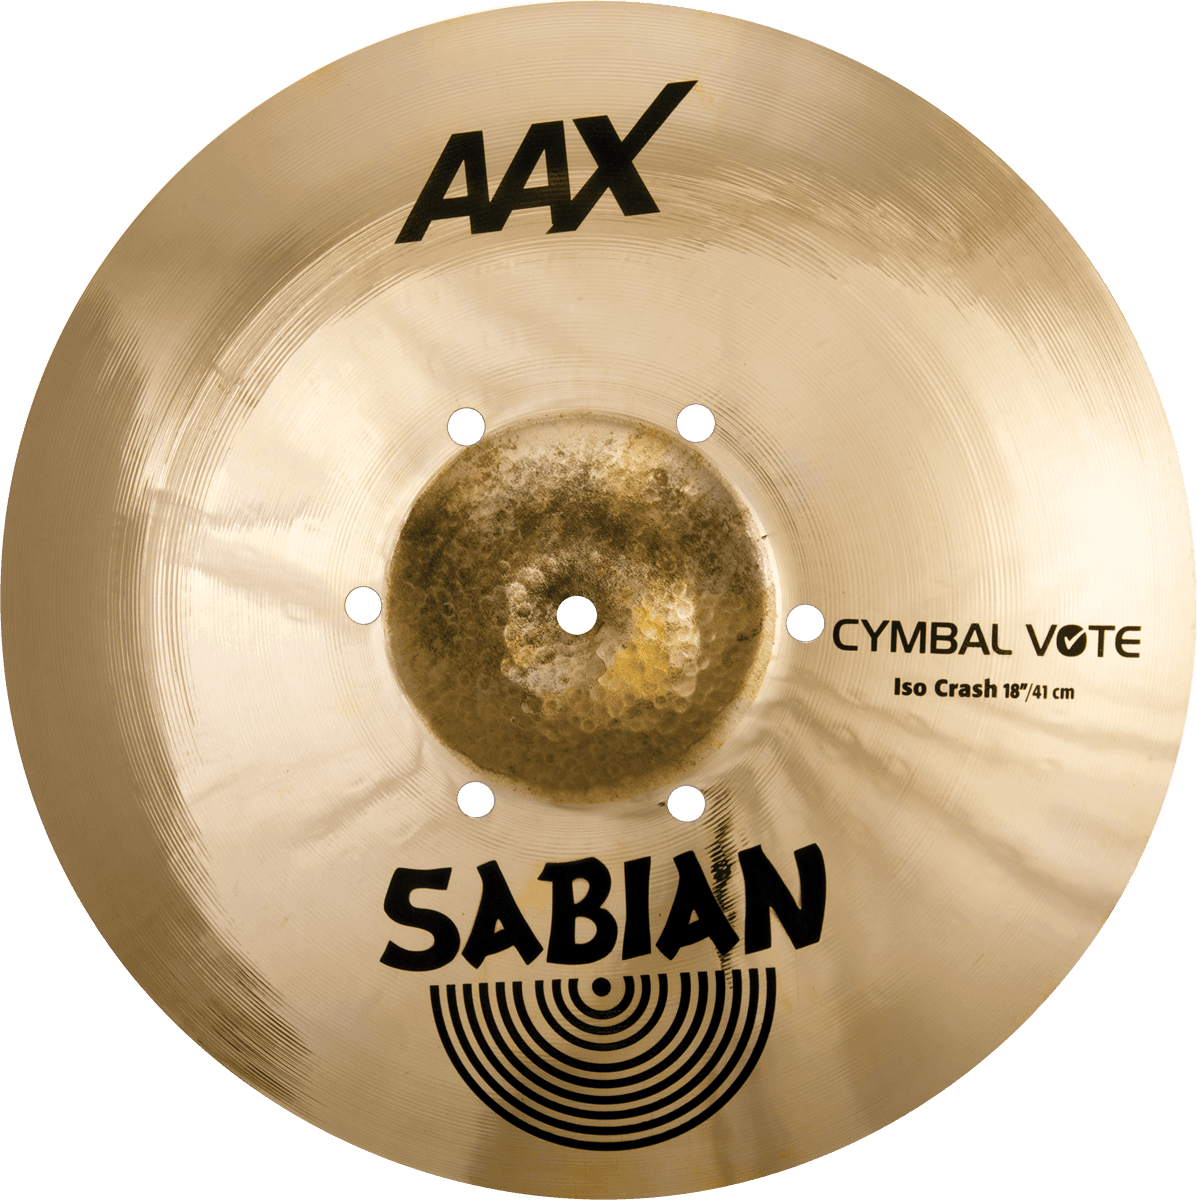 Sabian Aax   Cymbale Vote Iso Crash 18 - 18 Pouces - Crash Becken - Main picture